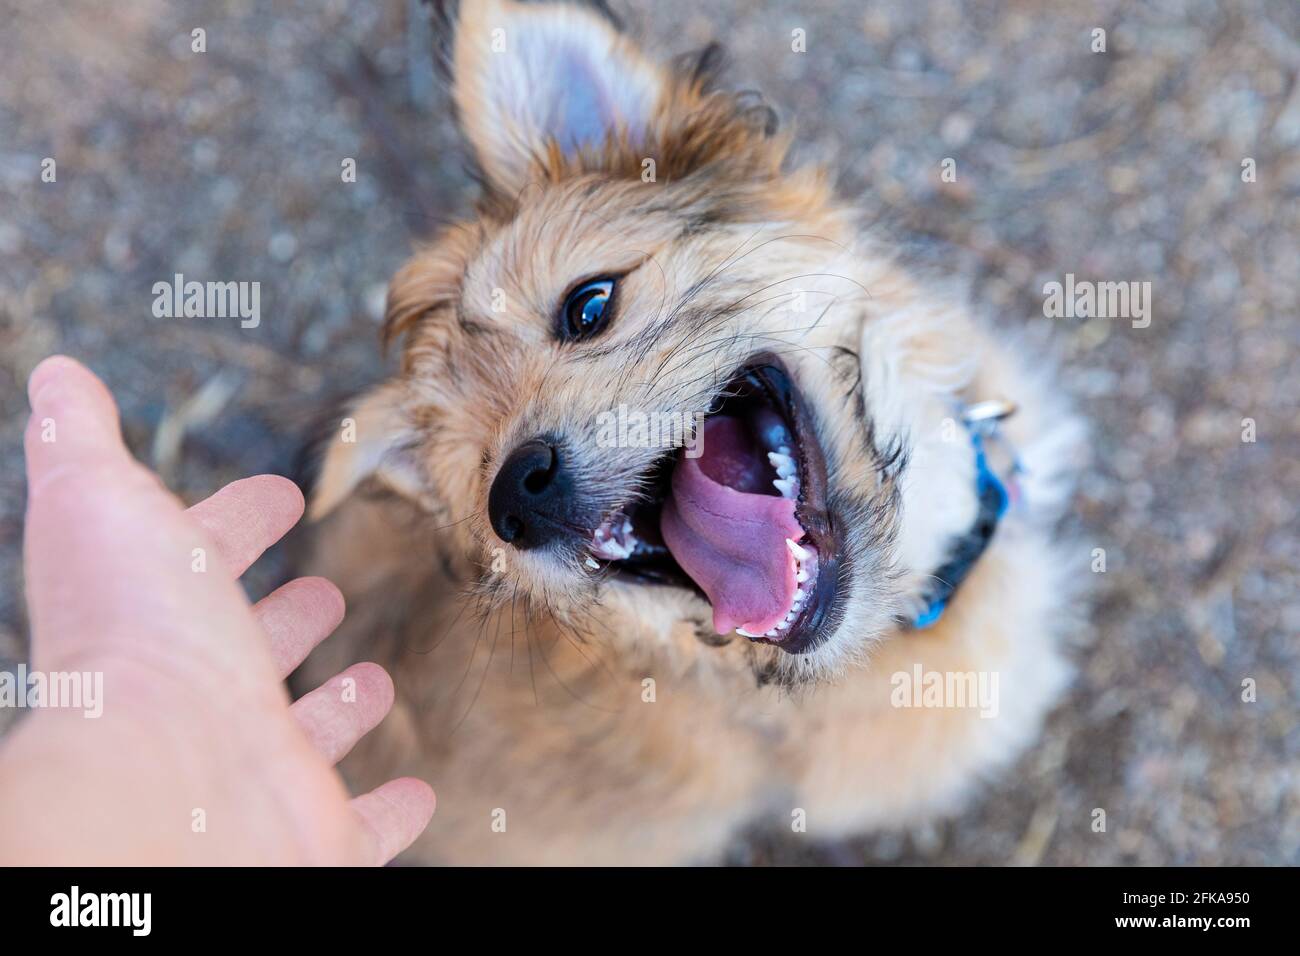 Cute mixed breed puppy with sharp puppy teeth. Stock Photo